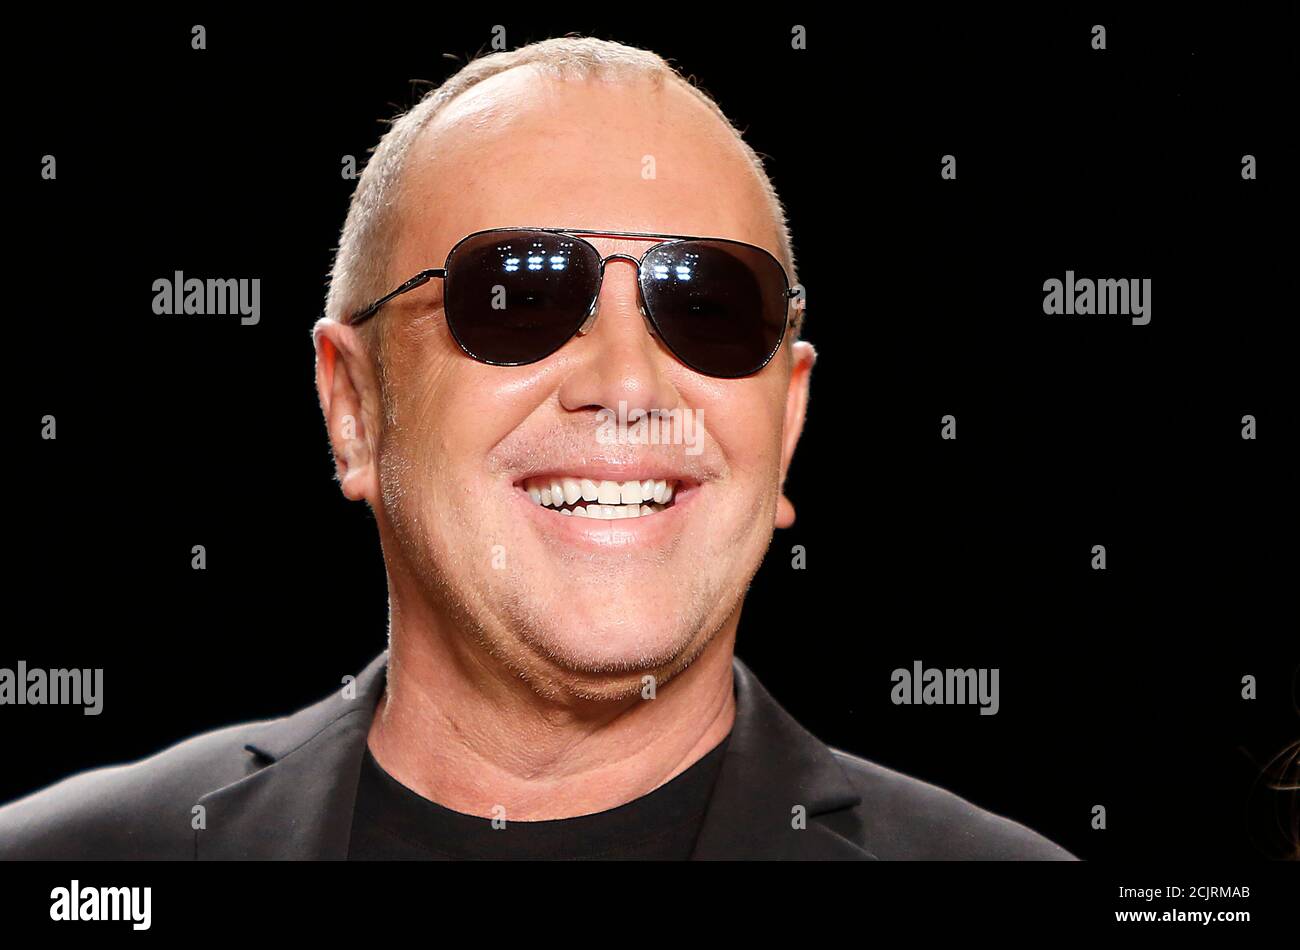 Designer Michael Kors stands on the runway before the Project Runway show at Fashion Week in New York, February 8, 2013.  REUTERS/Carlo Allegri  (UNITED STATES - Tags: ENTERTAINMENT PROFILE HEADSHOT FASHION) Stock Photo